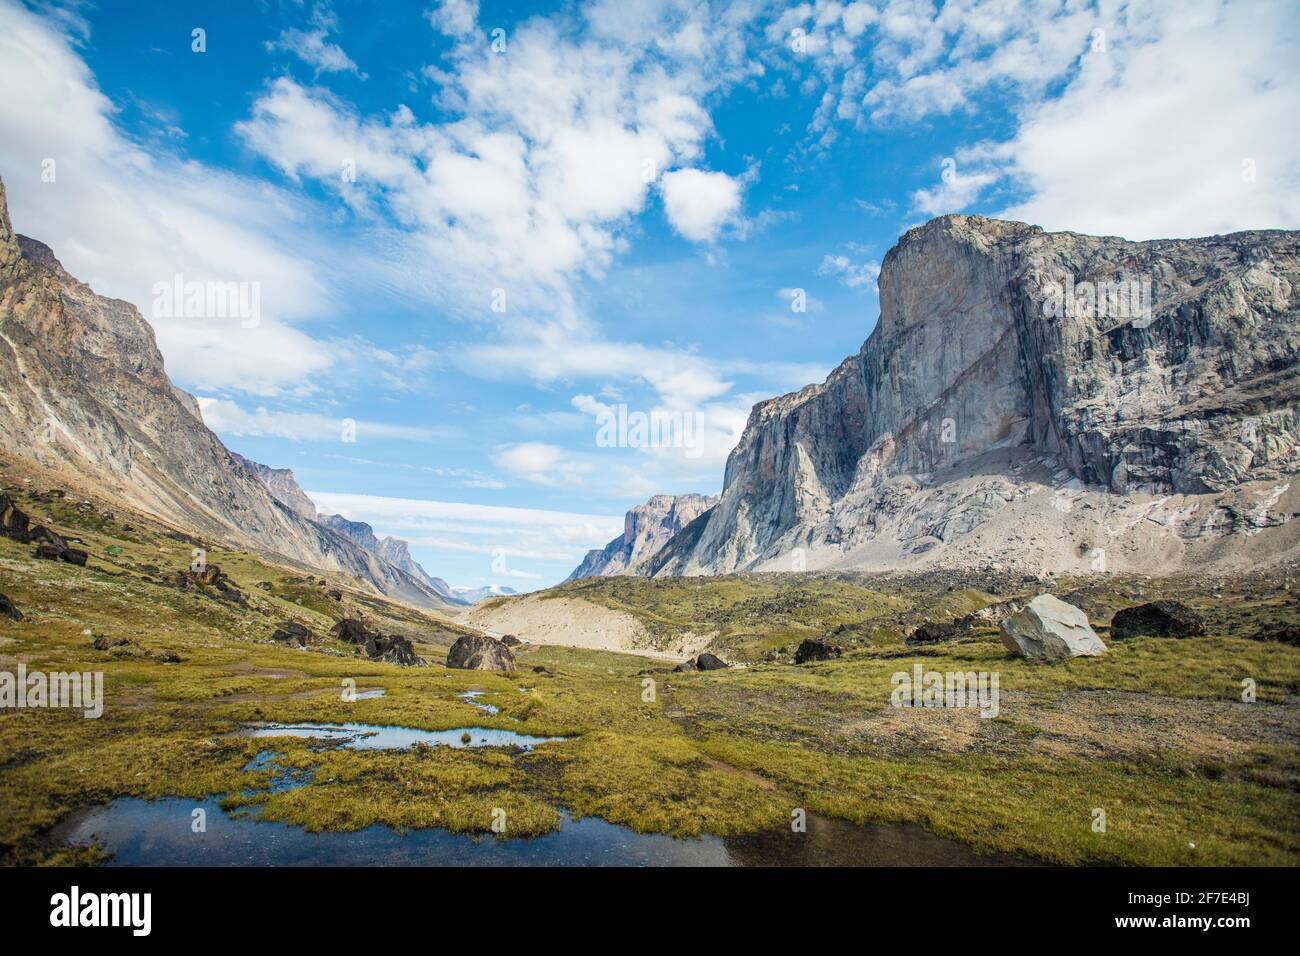 Landscape view of Mount Thor, Baffin Island, Canada. Stock Photo